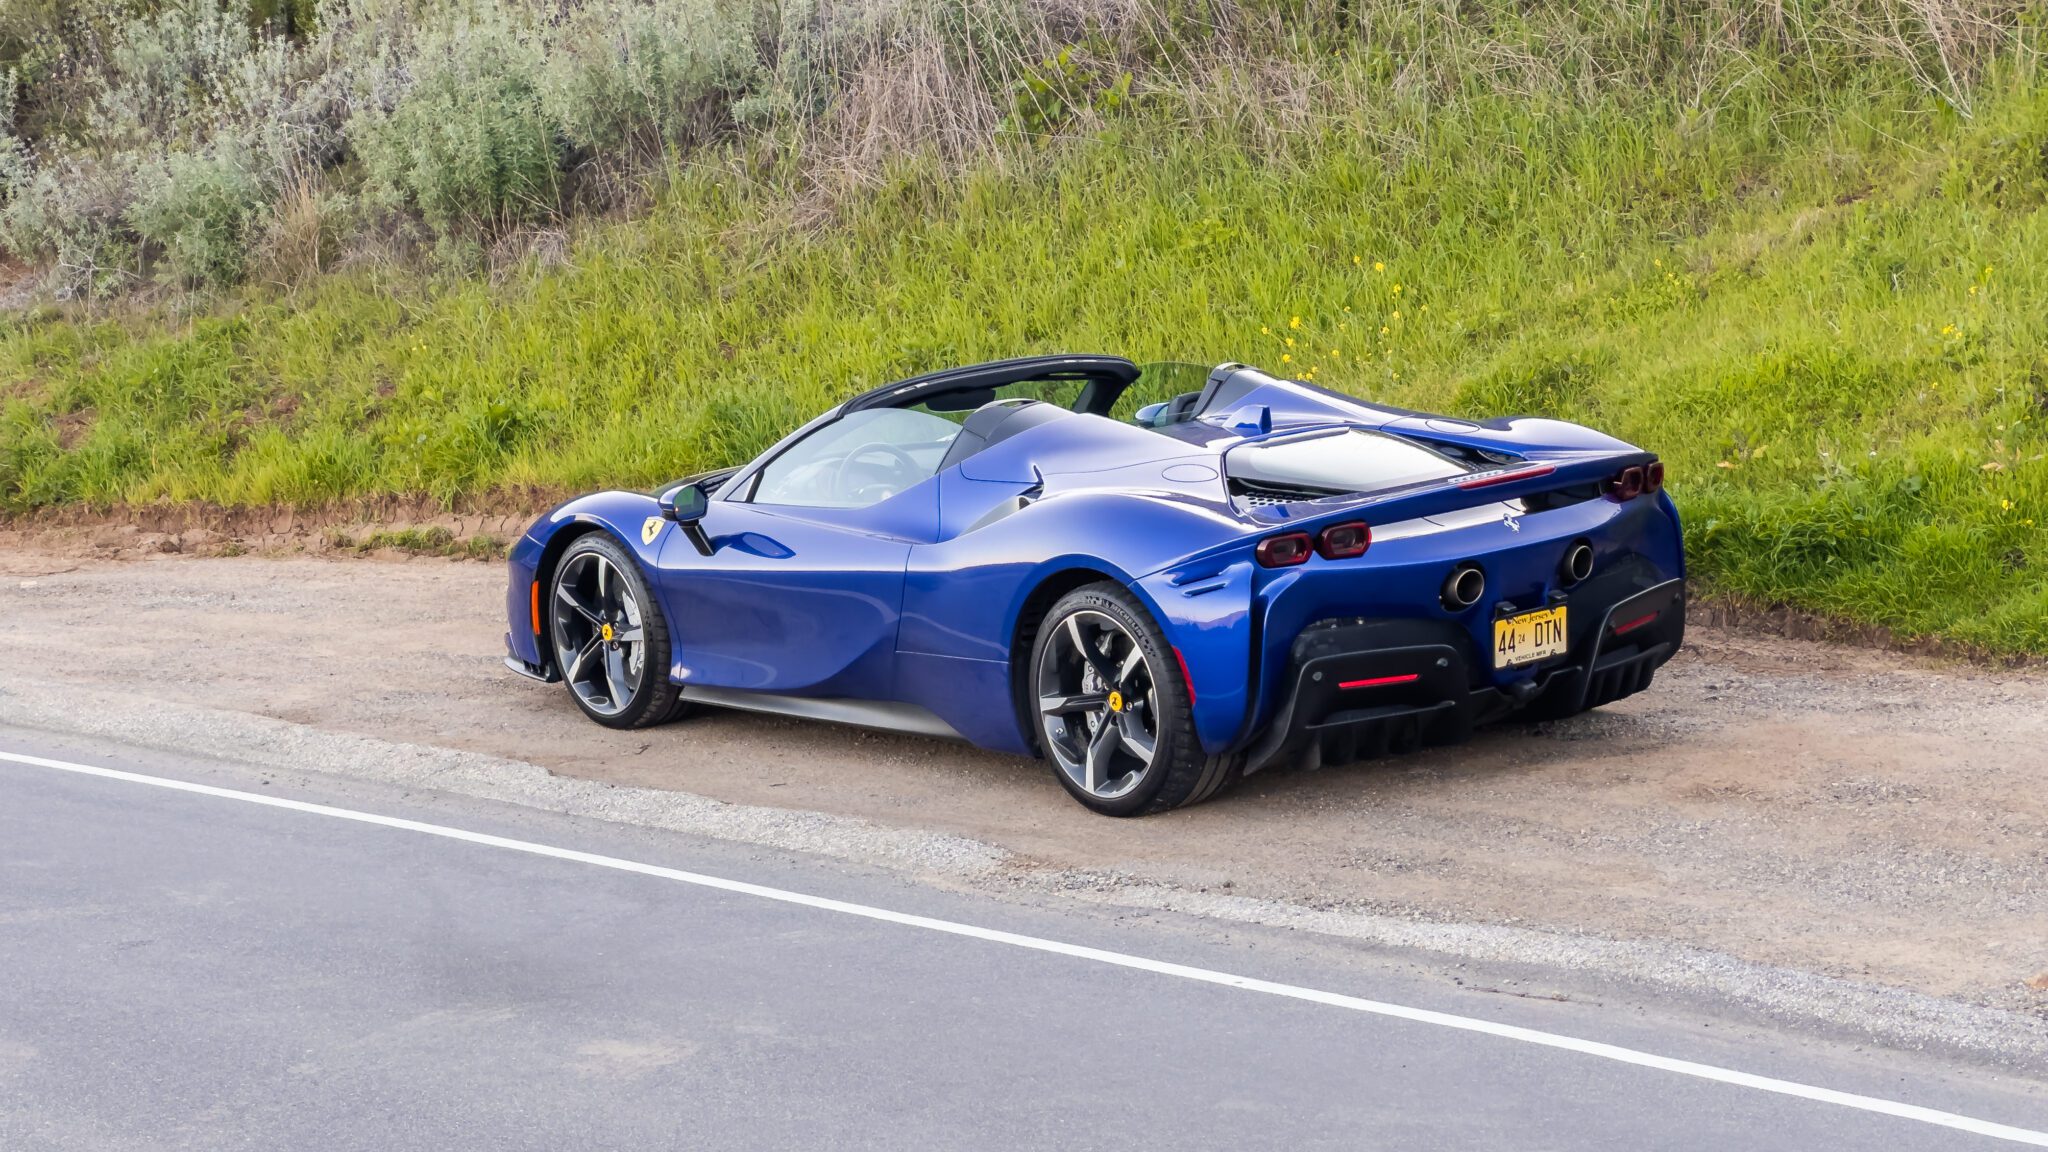 An image of a blue Ferrari SF90 parked outdoors.